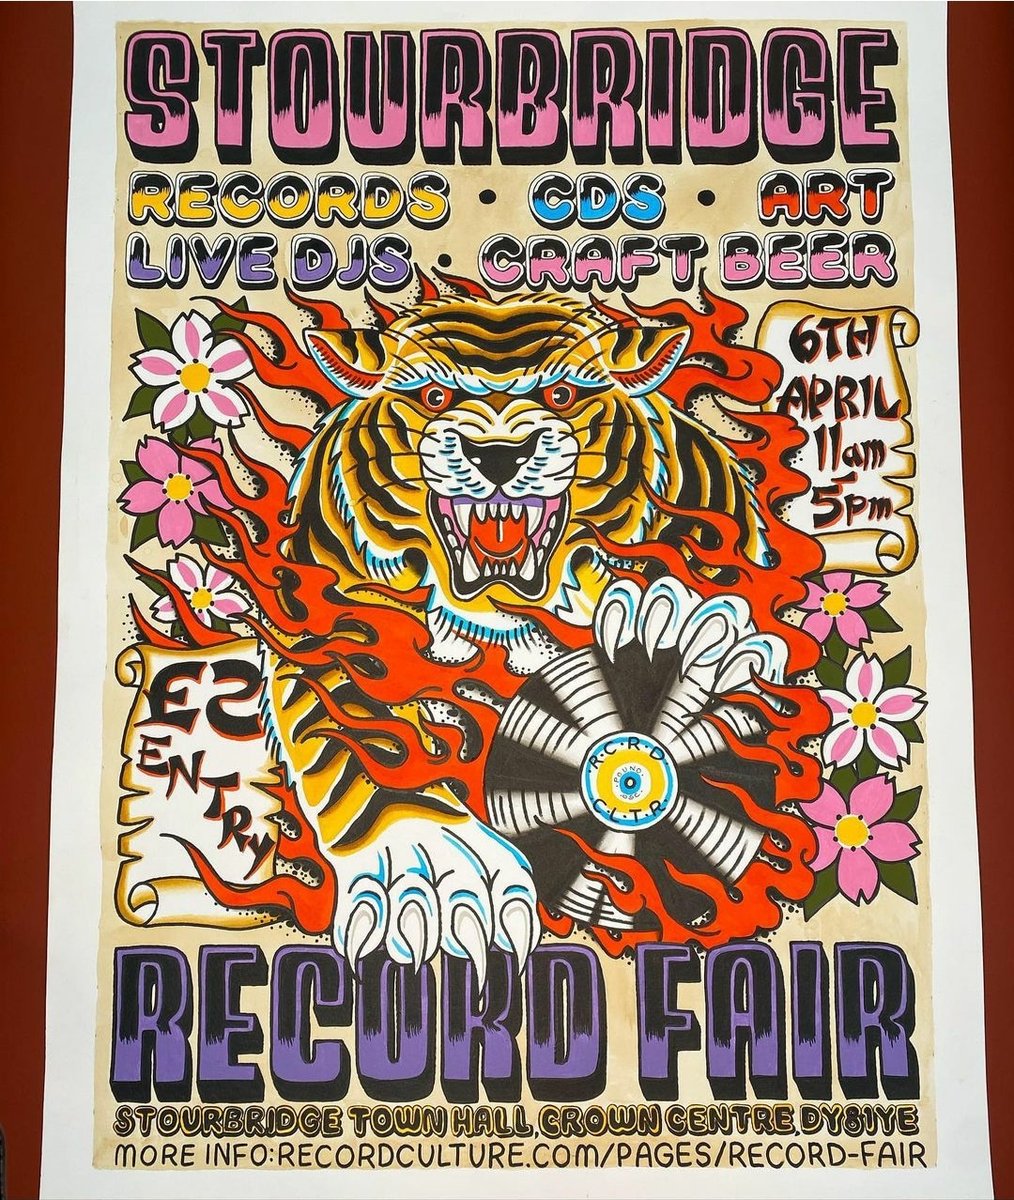 A week and a bit until the Stourbridge Record & Music Fair. Hand-painted poster looking absolutely 🤩🤩 Hope lots of you can make it down ✌🏻